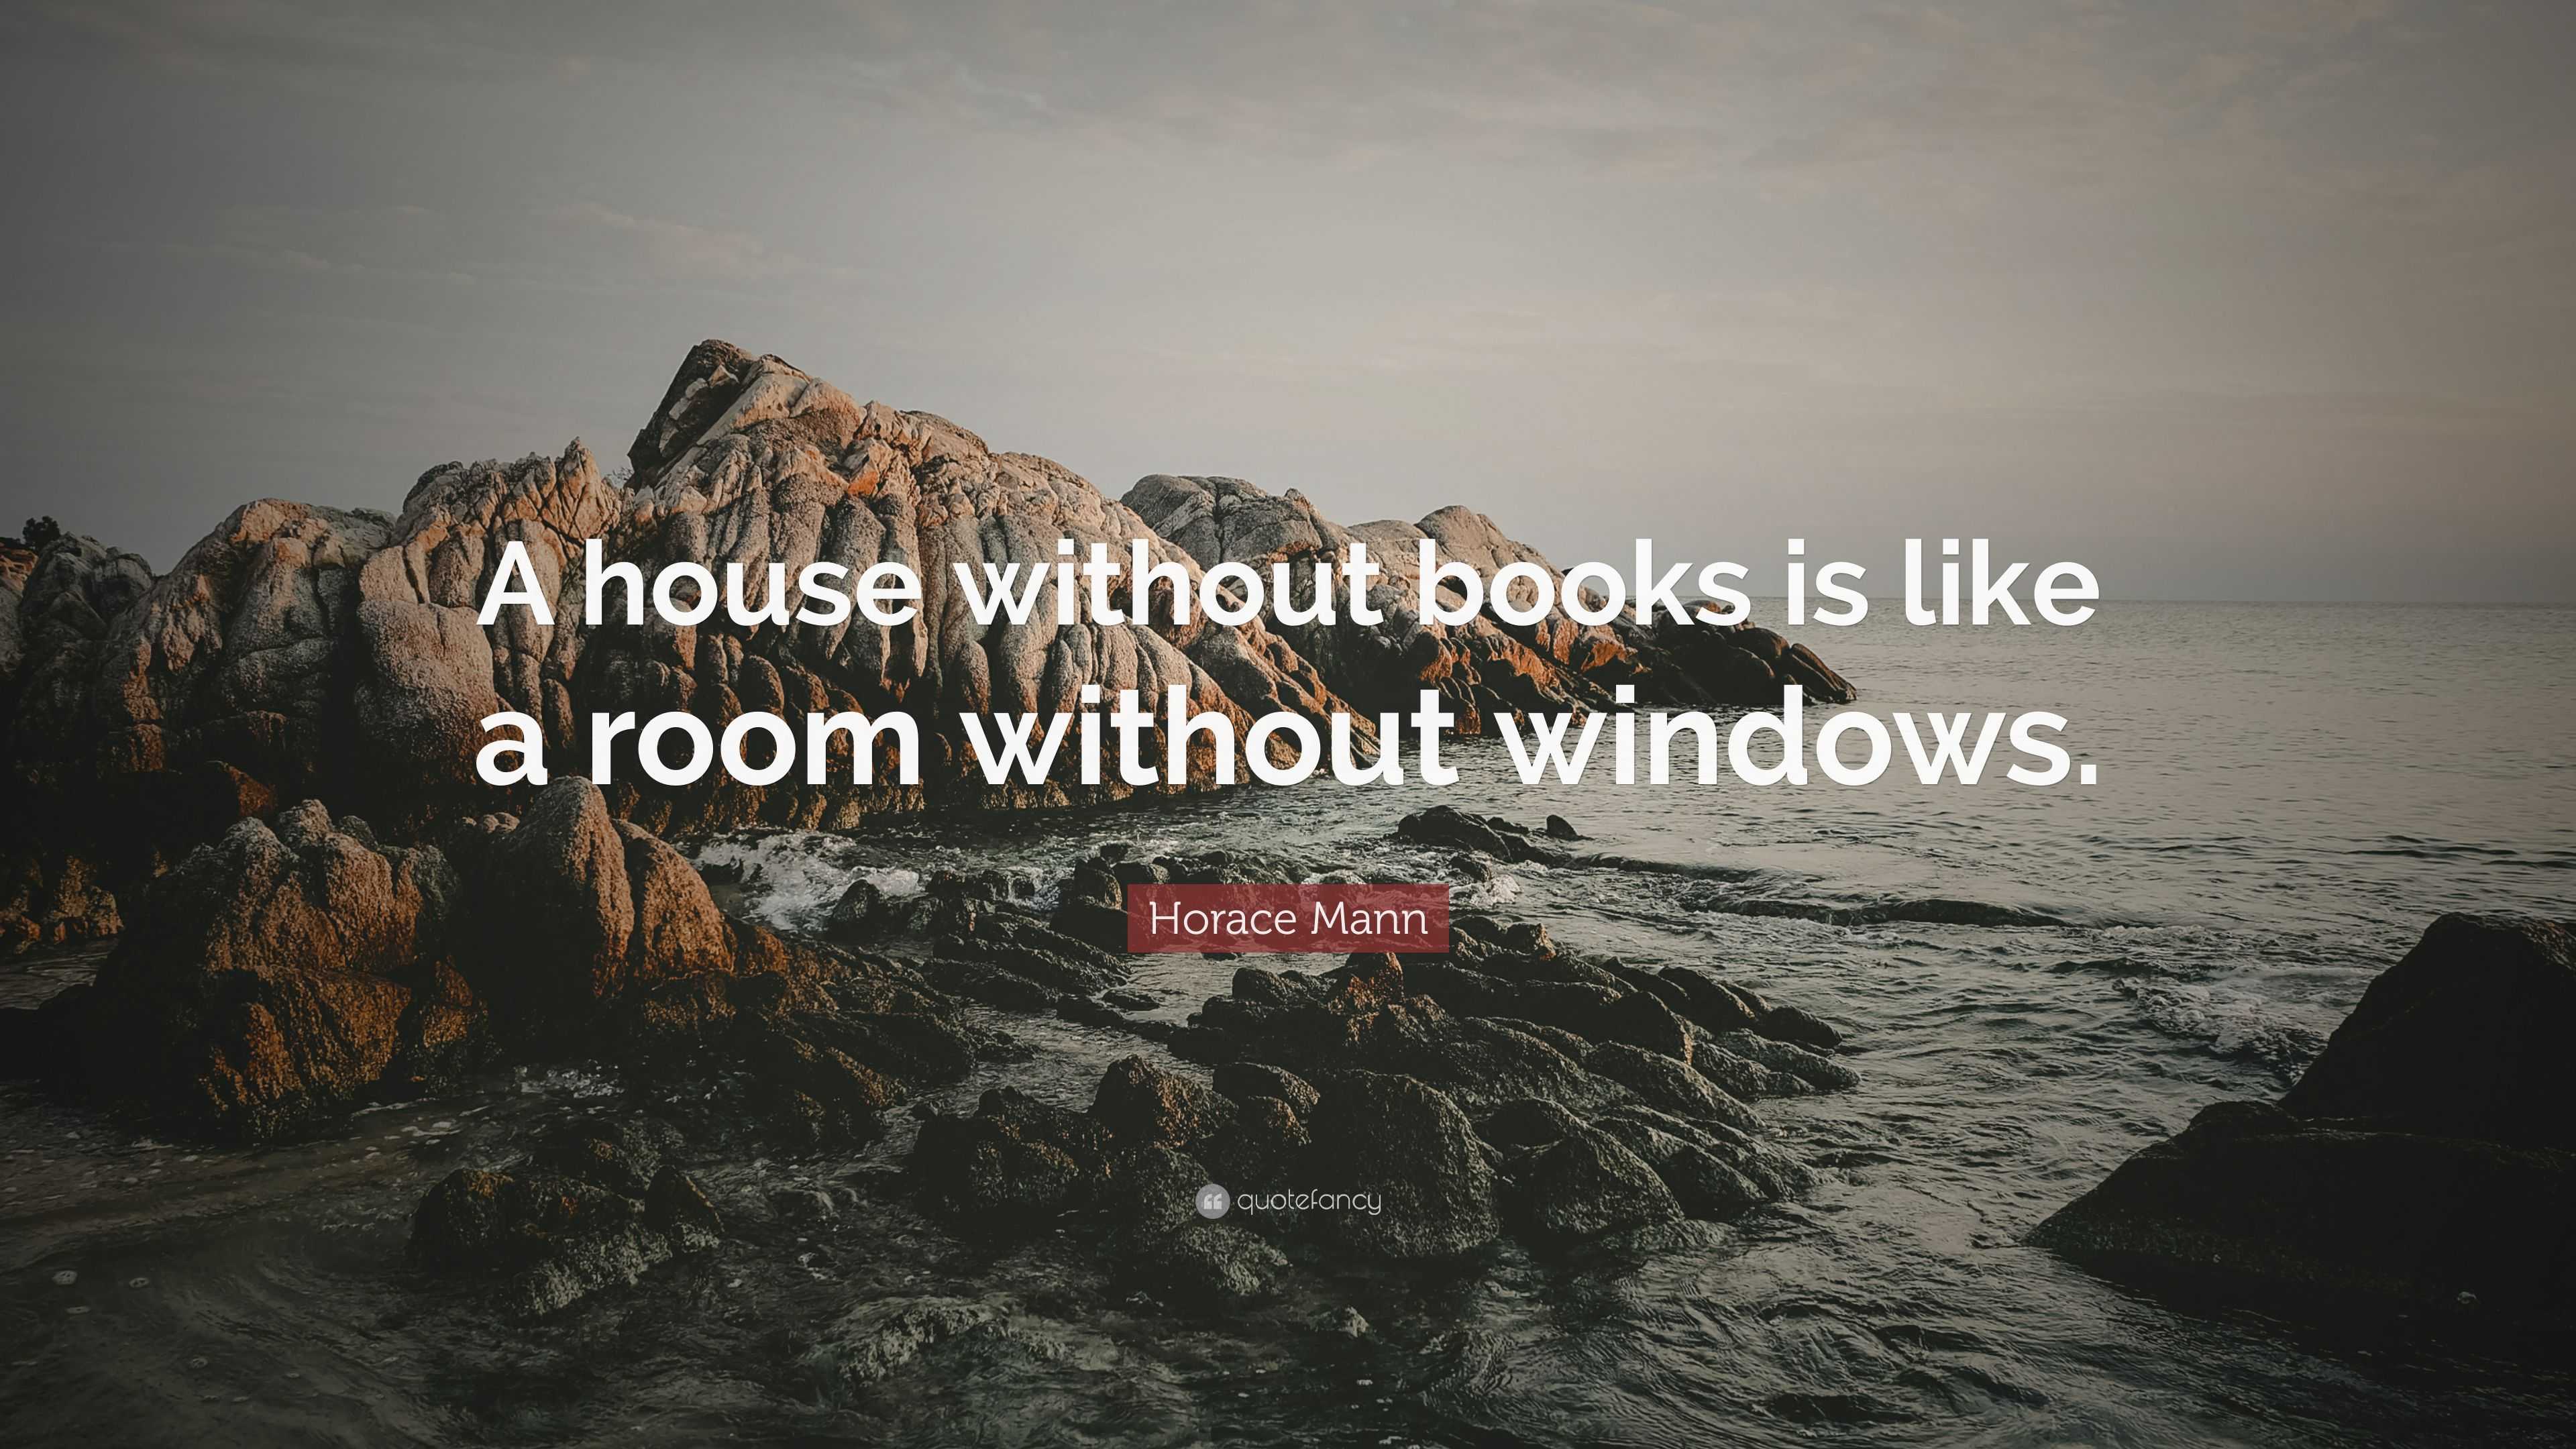 Horace Mann Quote: “A house without books is like a room ...